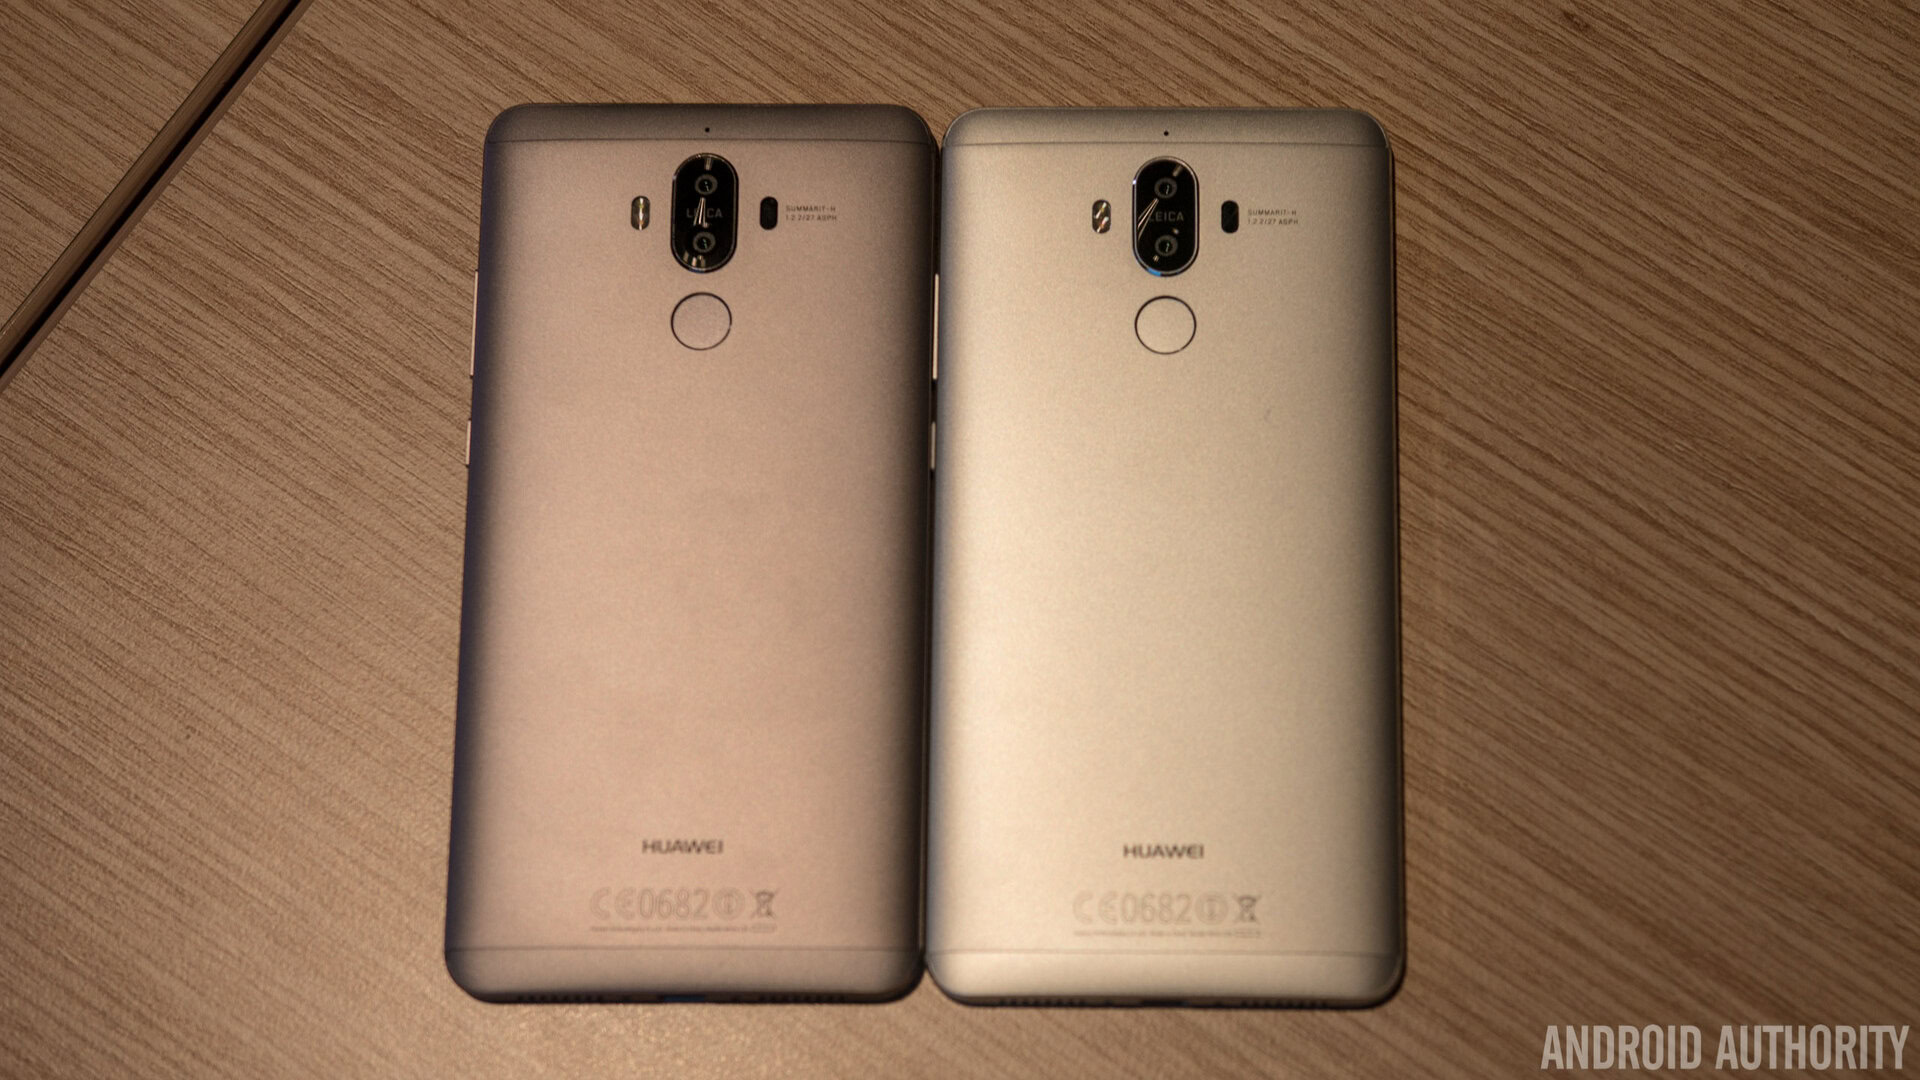 haspel Zeehaven Kameel HUAWEI Mate 9 specs, price, release date and everything else you should know